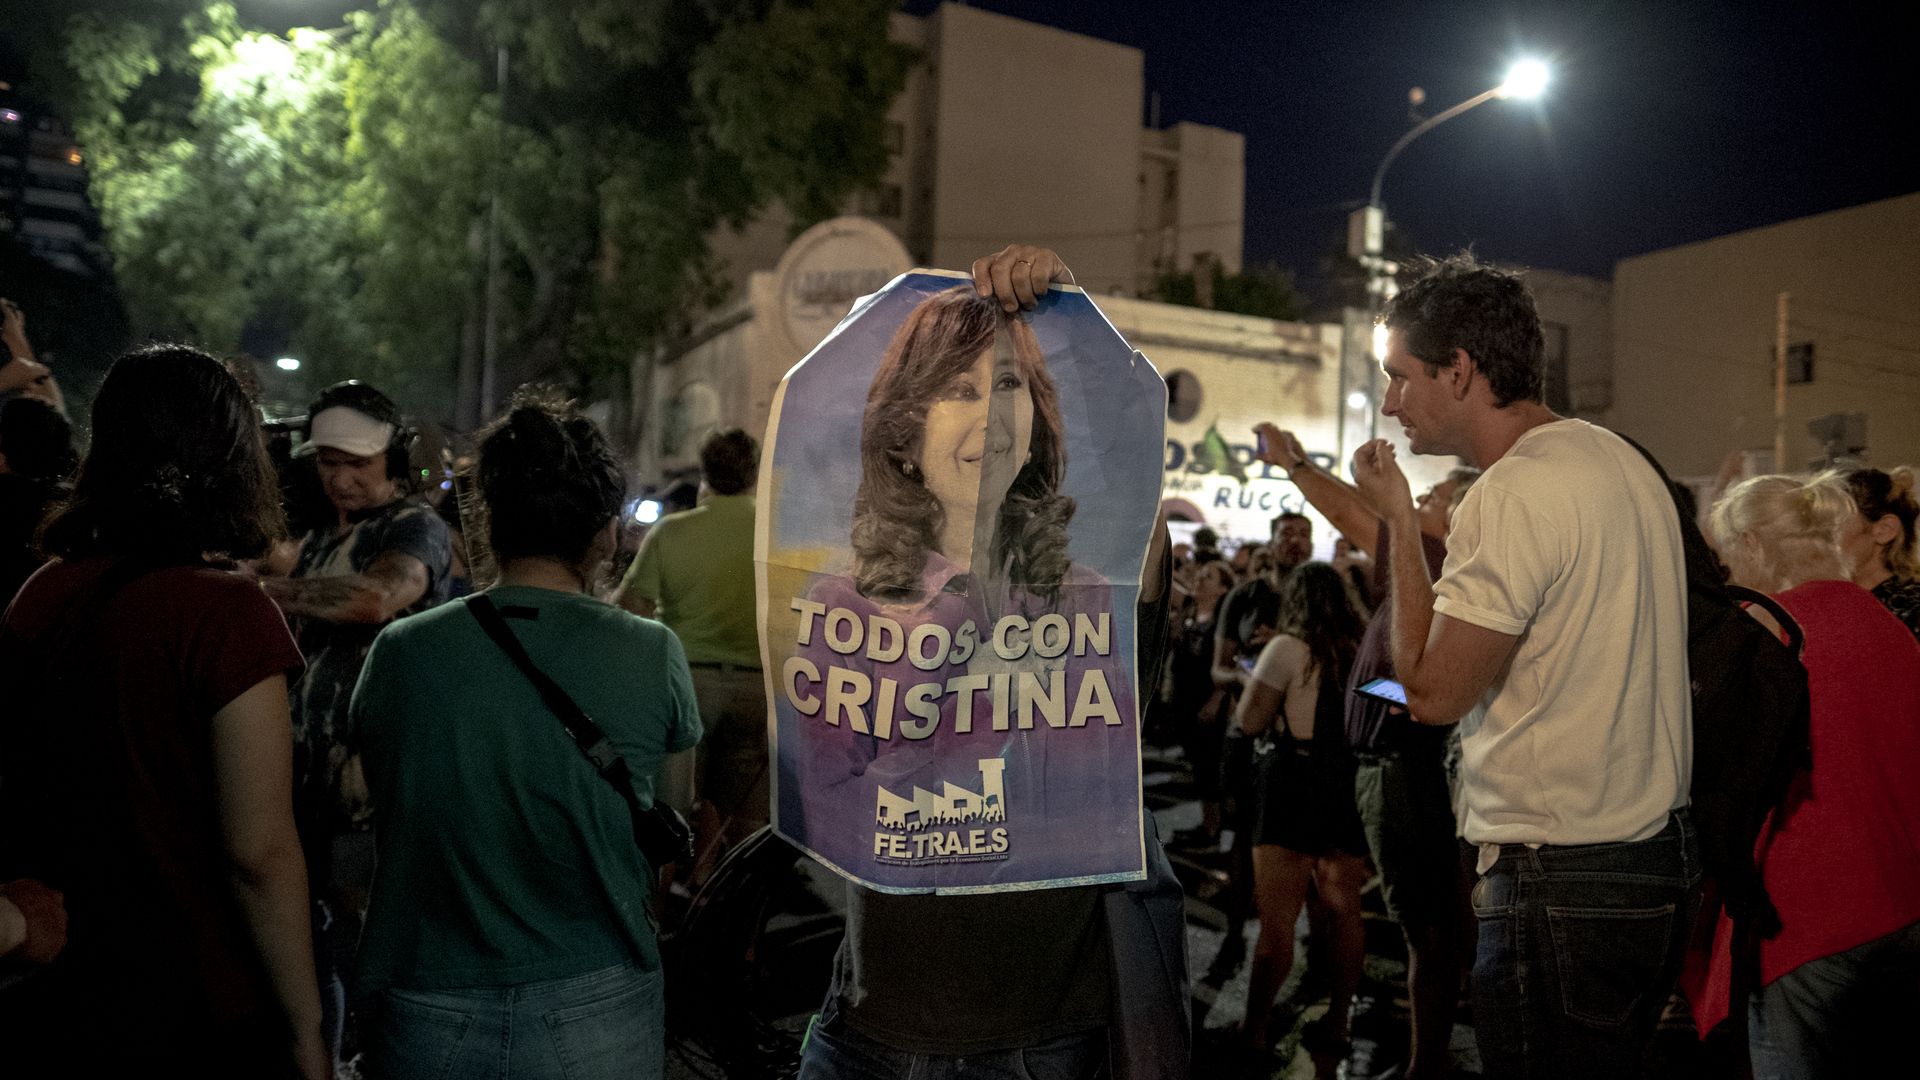 A supporter holds up a blue poster of Cristina Fernández de Kirchner that says "we are all with Cristina" in Spanish